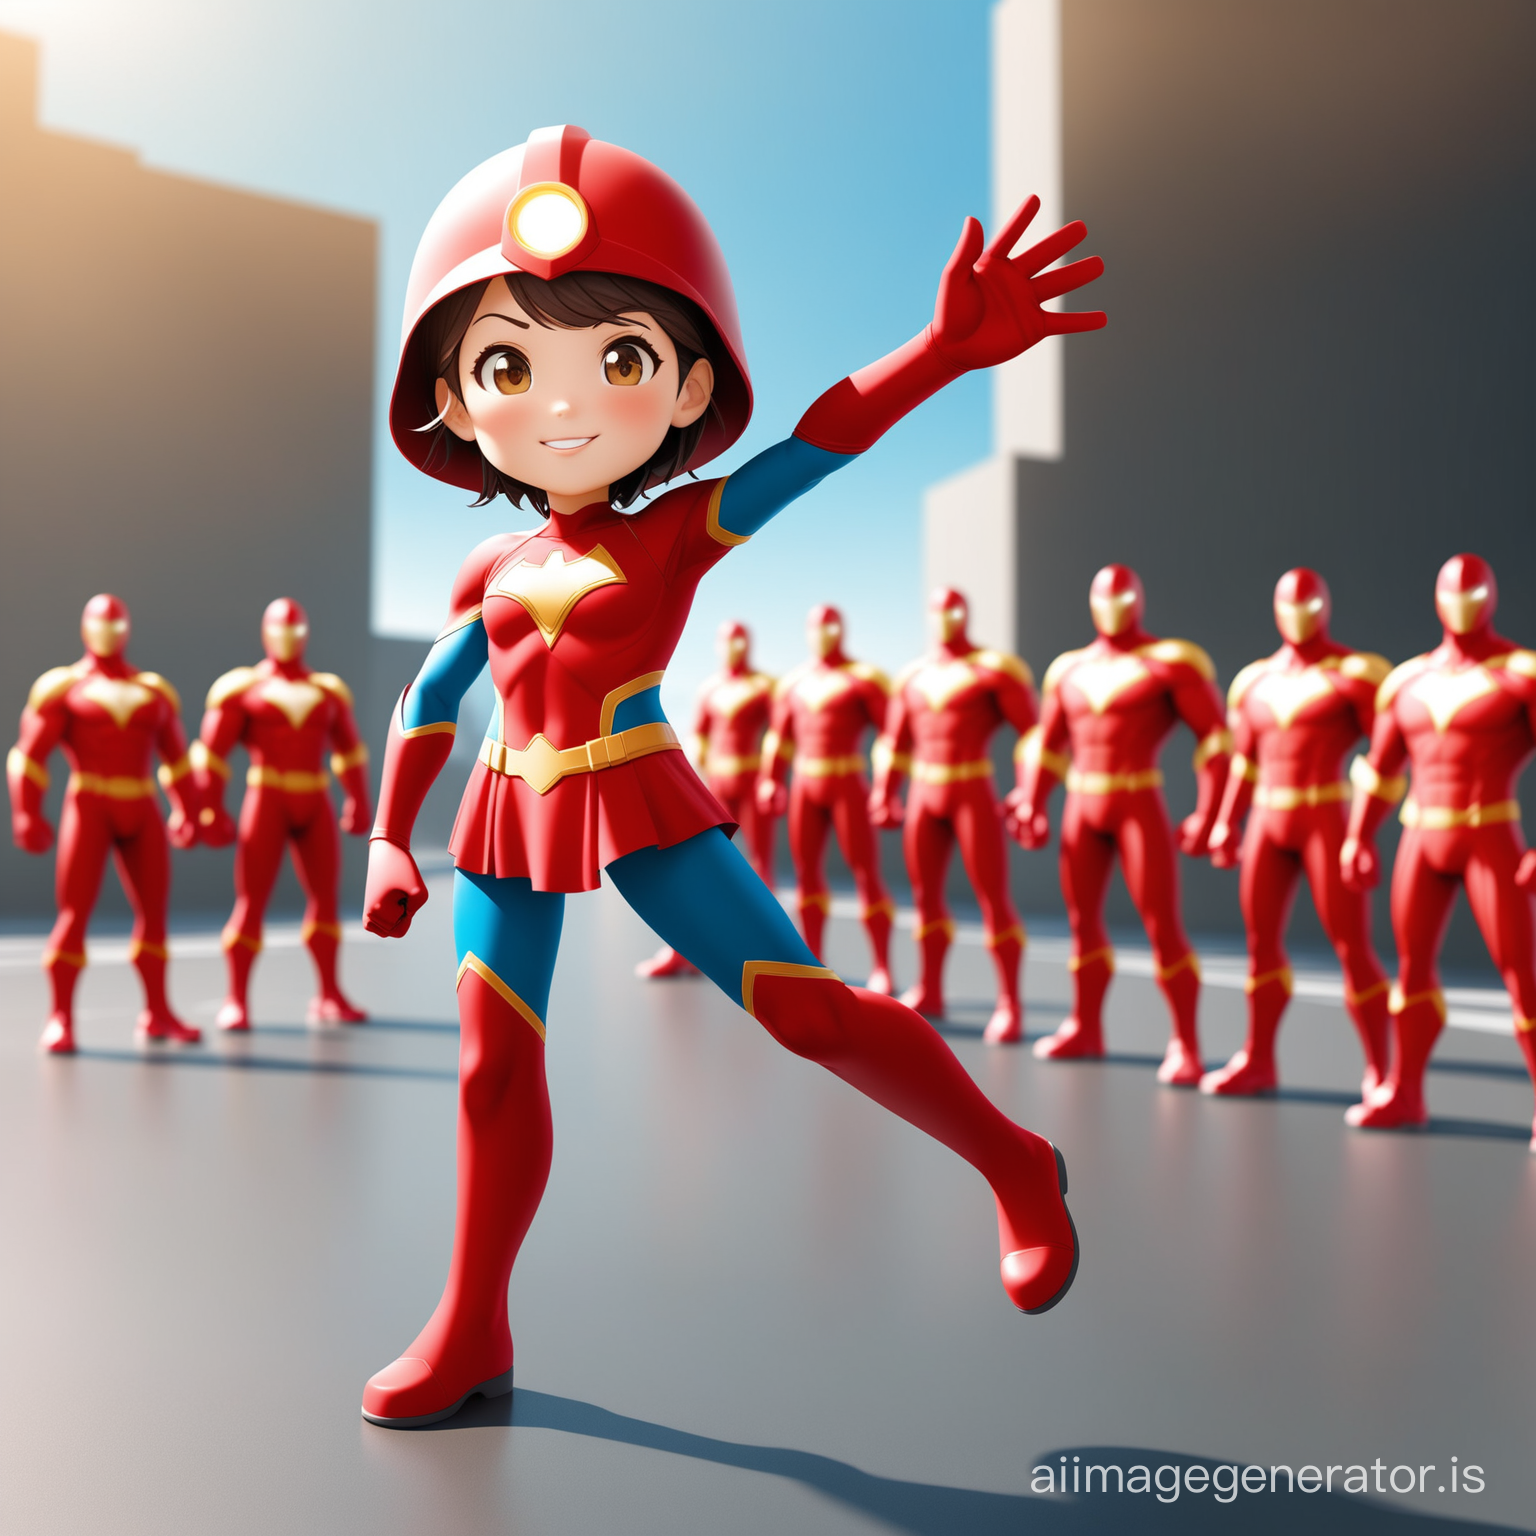 cgi character of super hero recycling warrior. Should be wearing a red cape and red helmet.  Add multiple different characters in the background.Add a female character in red and posing with arm in the air



